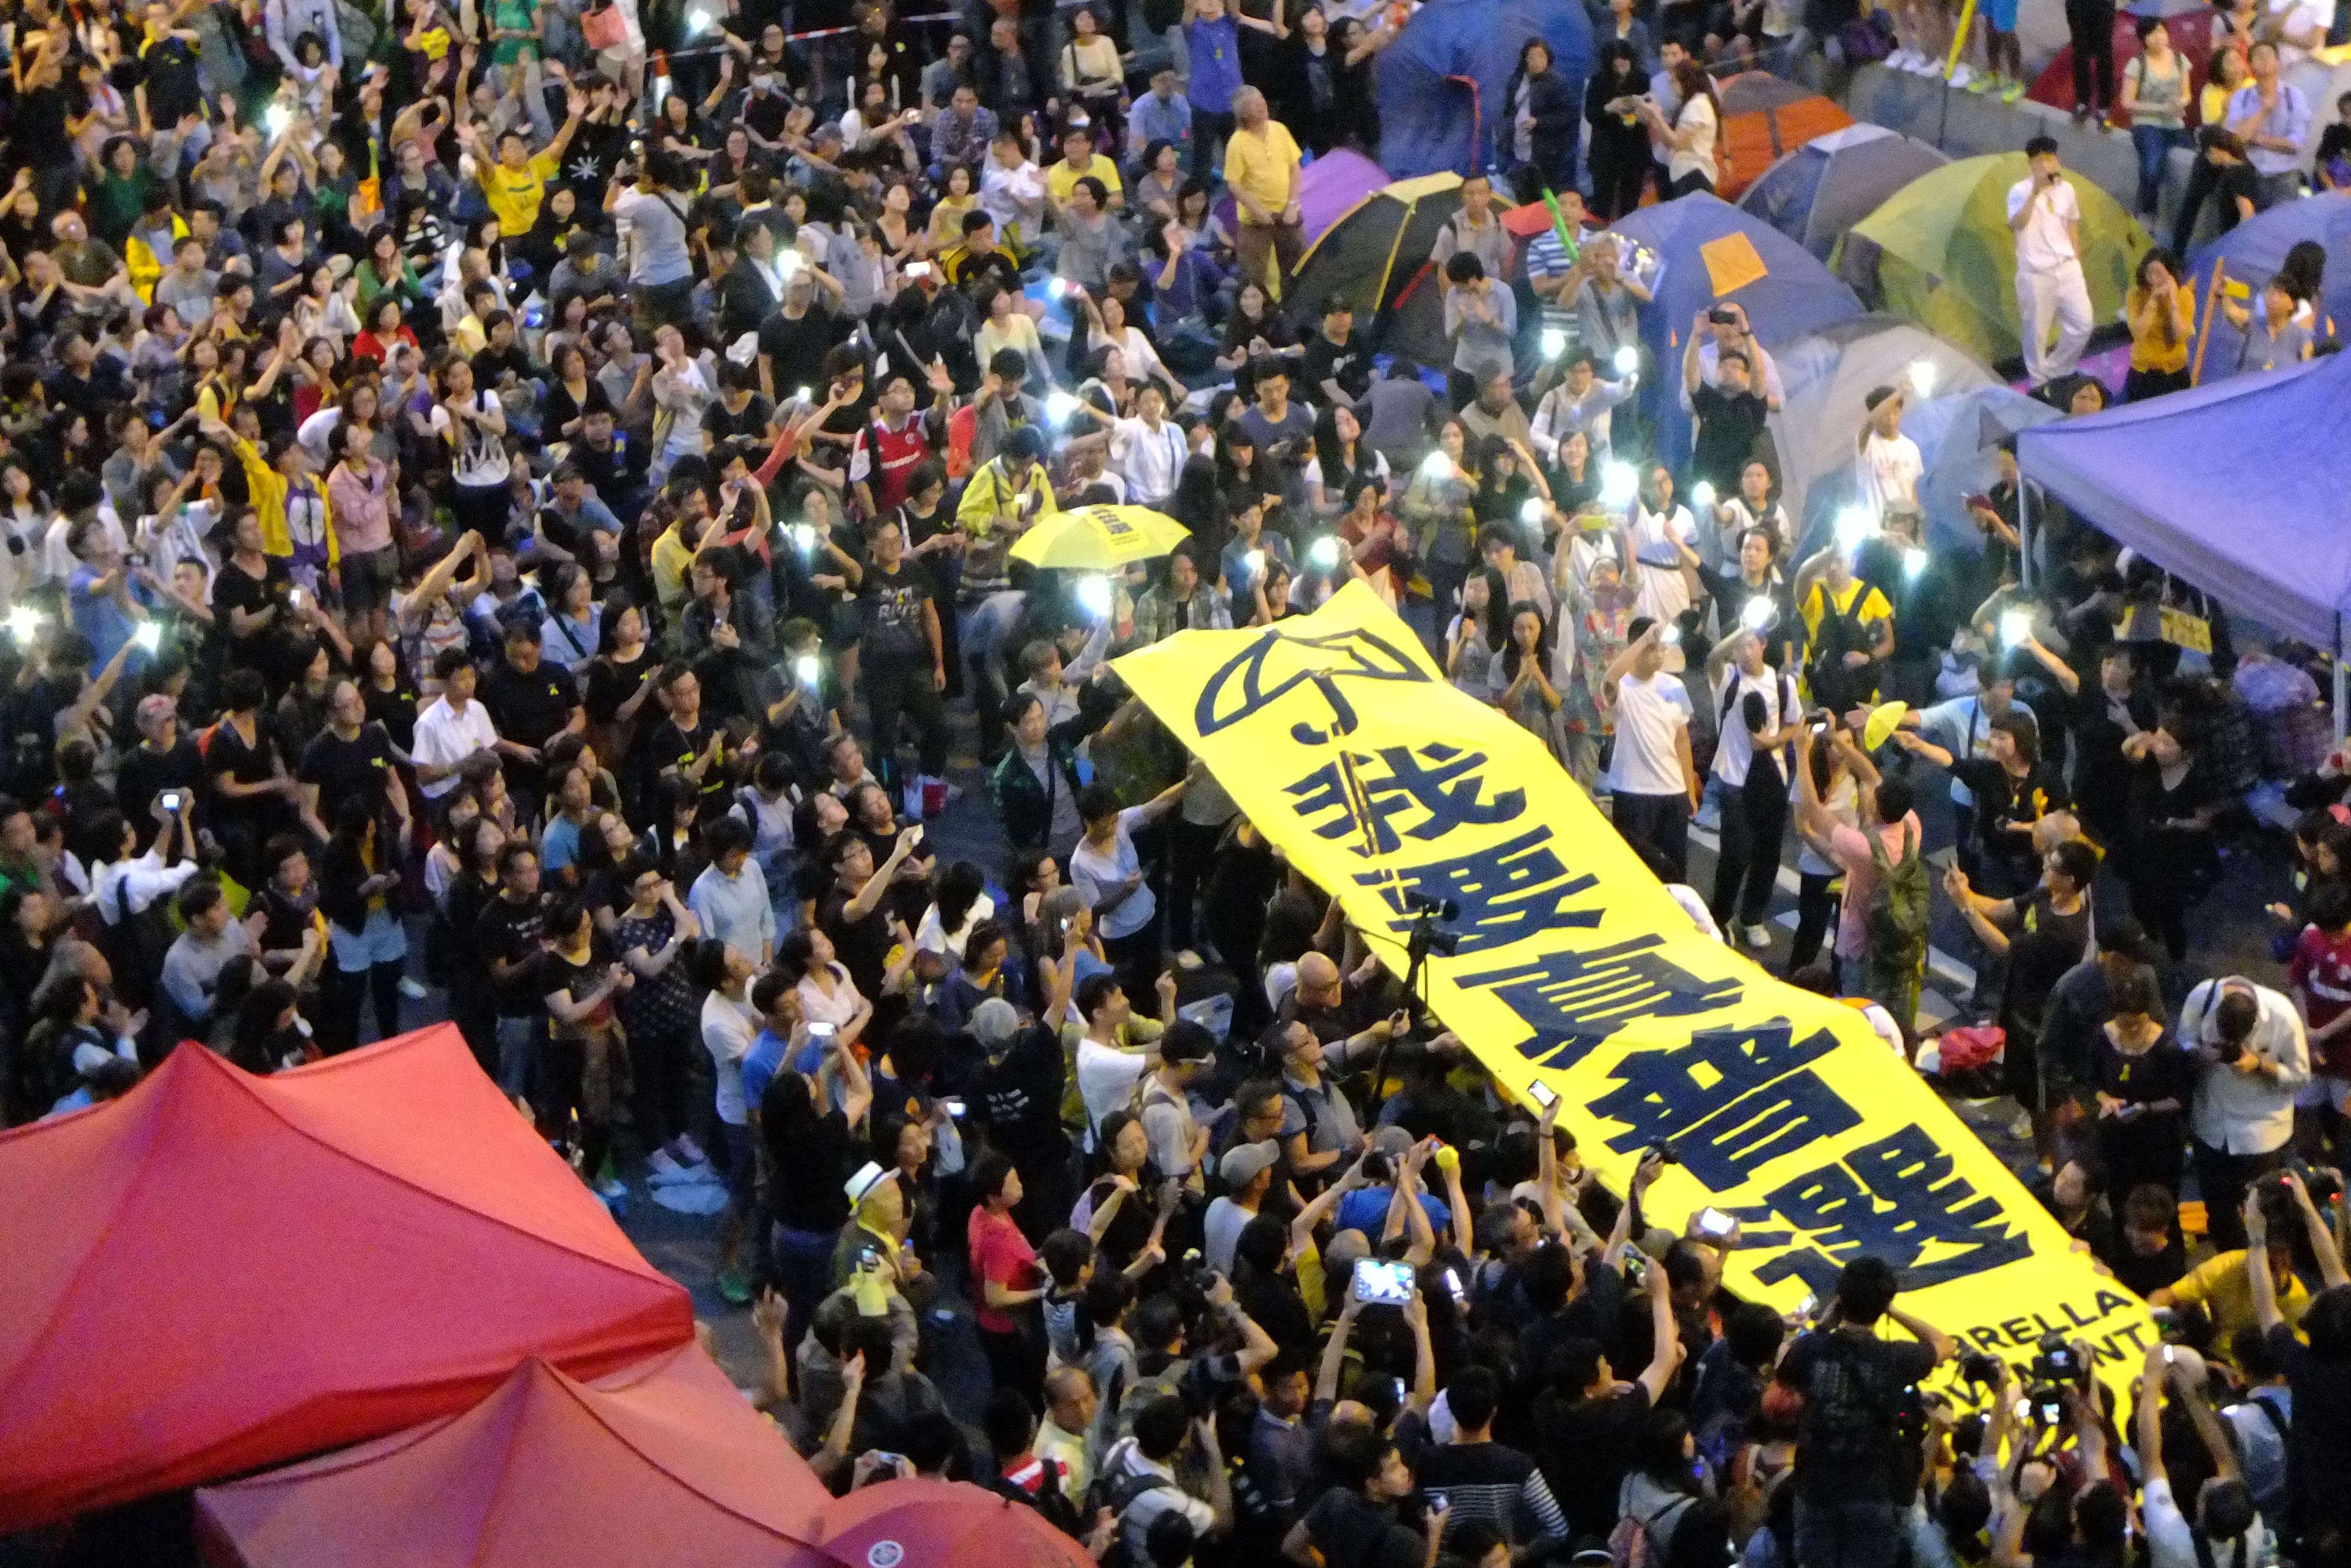 Hong Kong flights cancelled for the day amidst protests at the airport